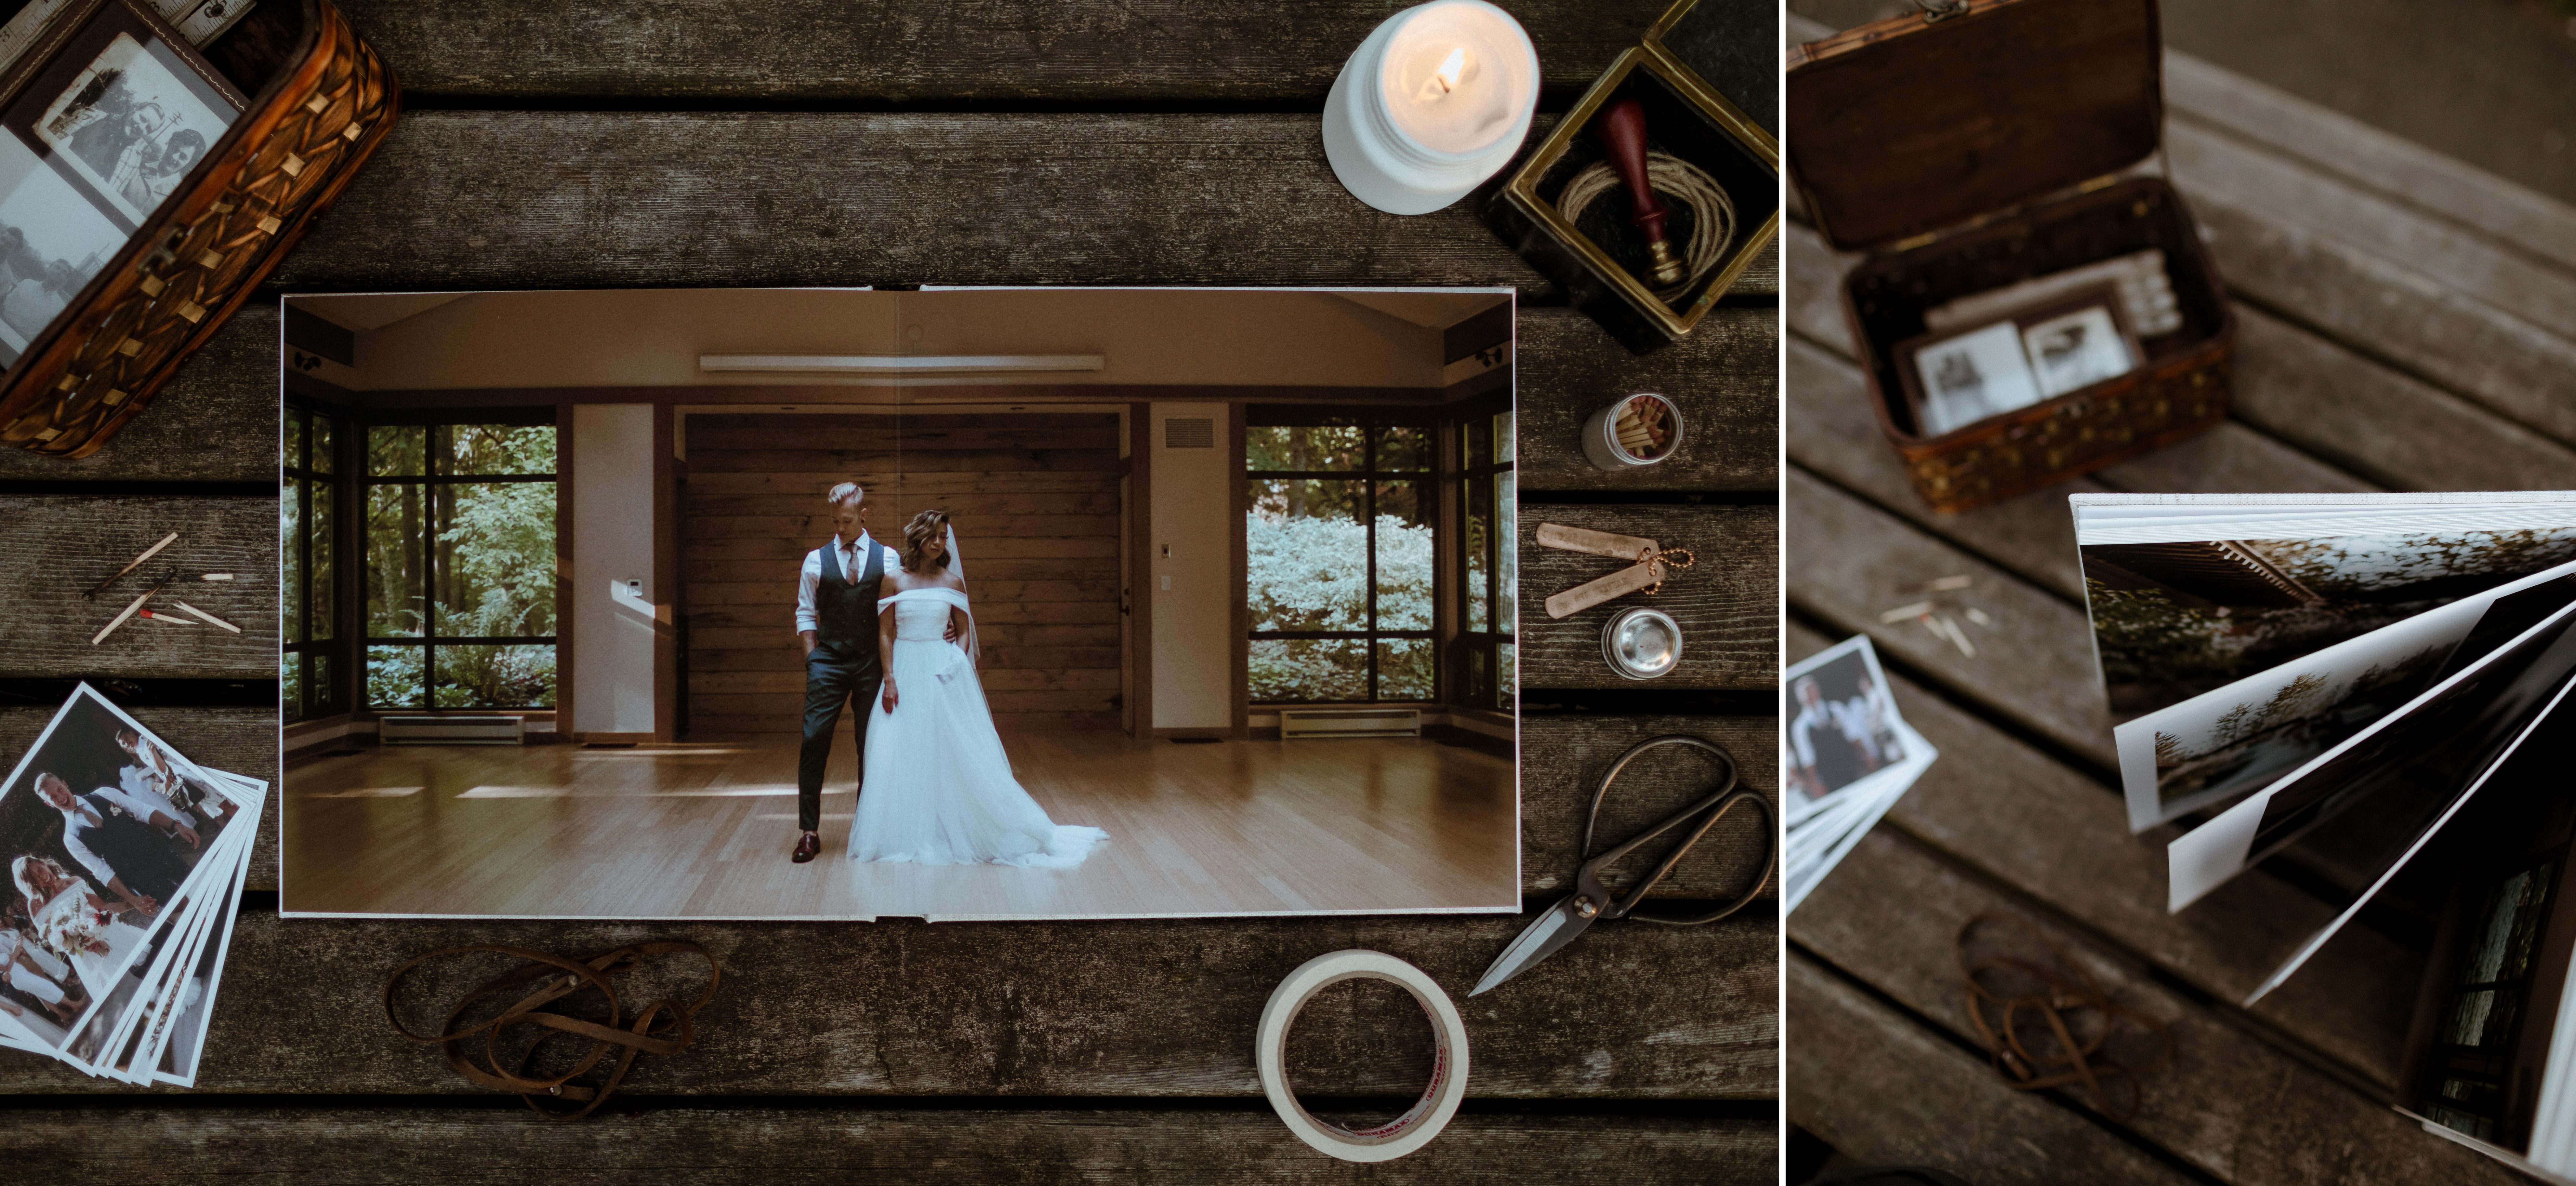 Ideas that you can do with your wedding photos. 